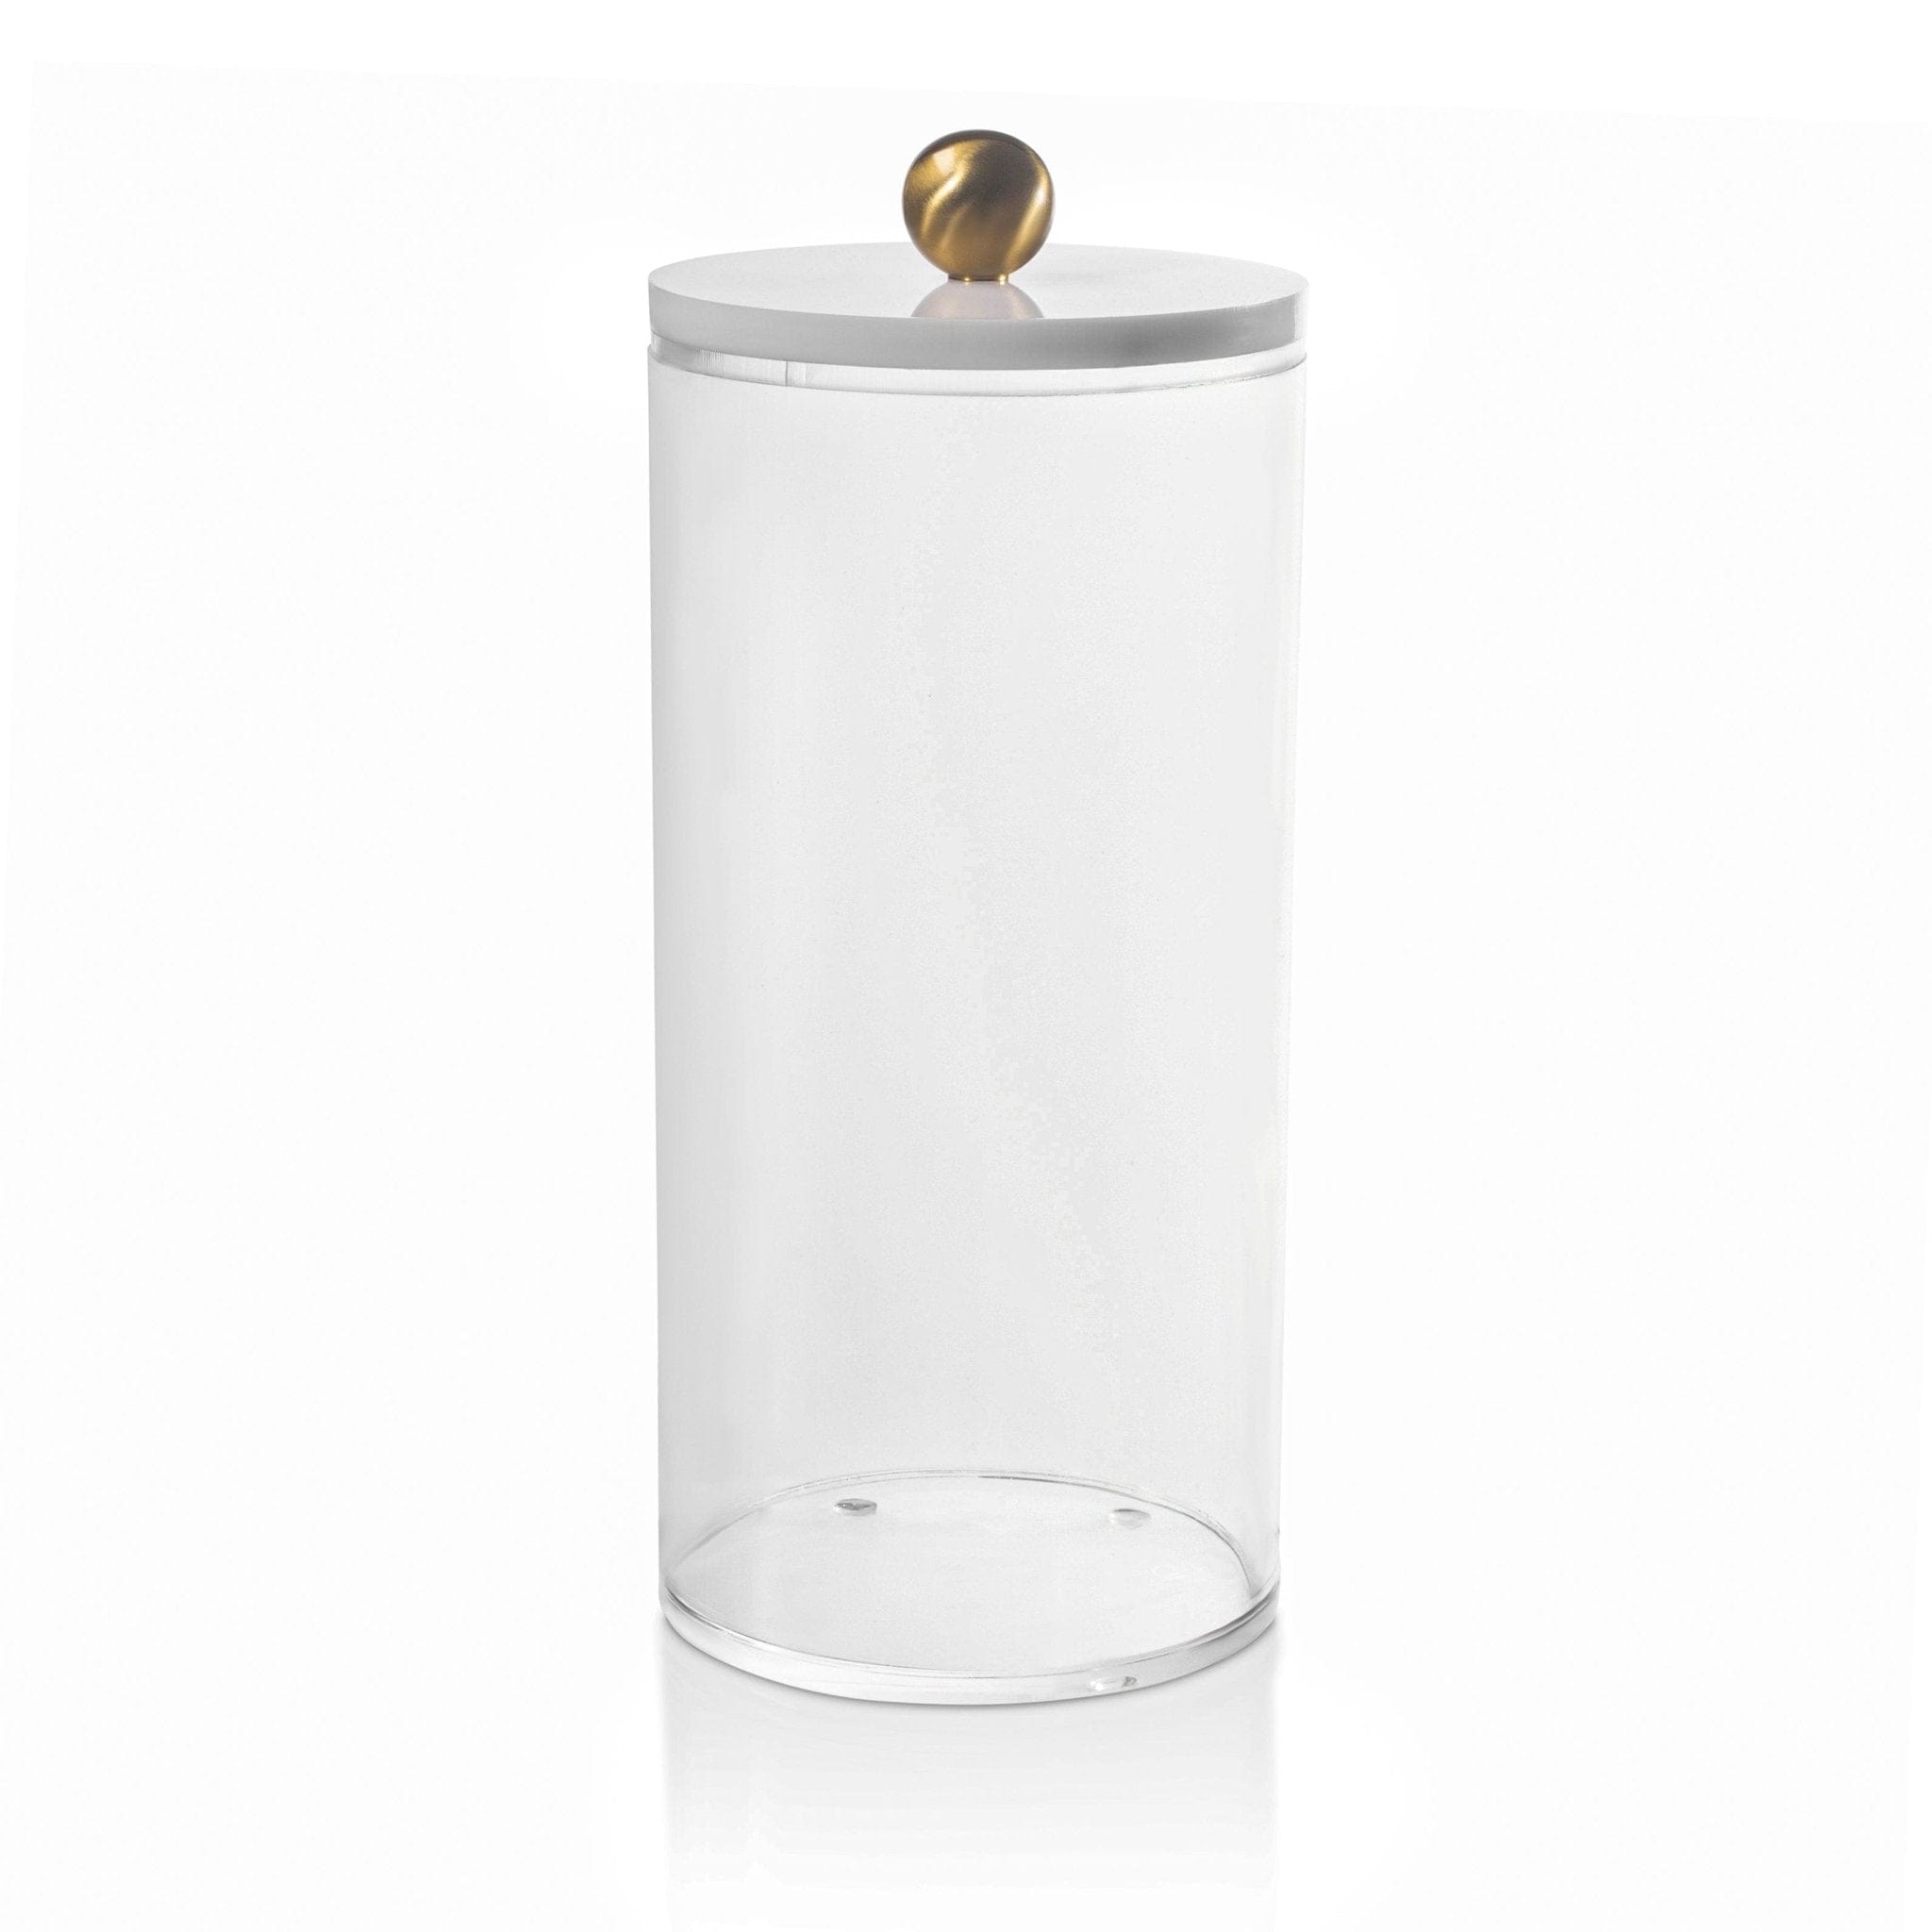 Corporate Gifting - Canister Set - Waterdale Collection